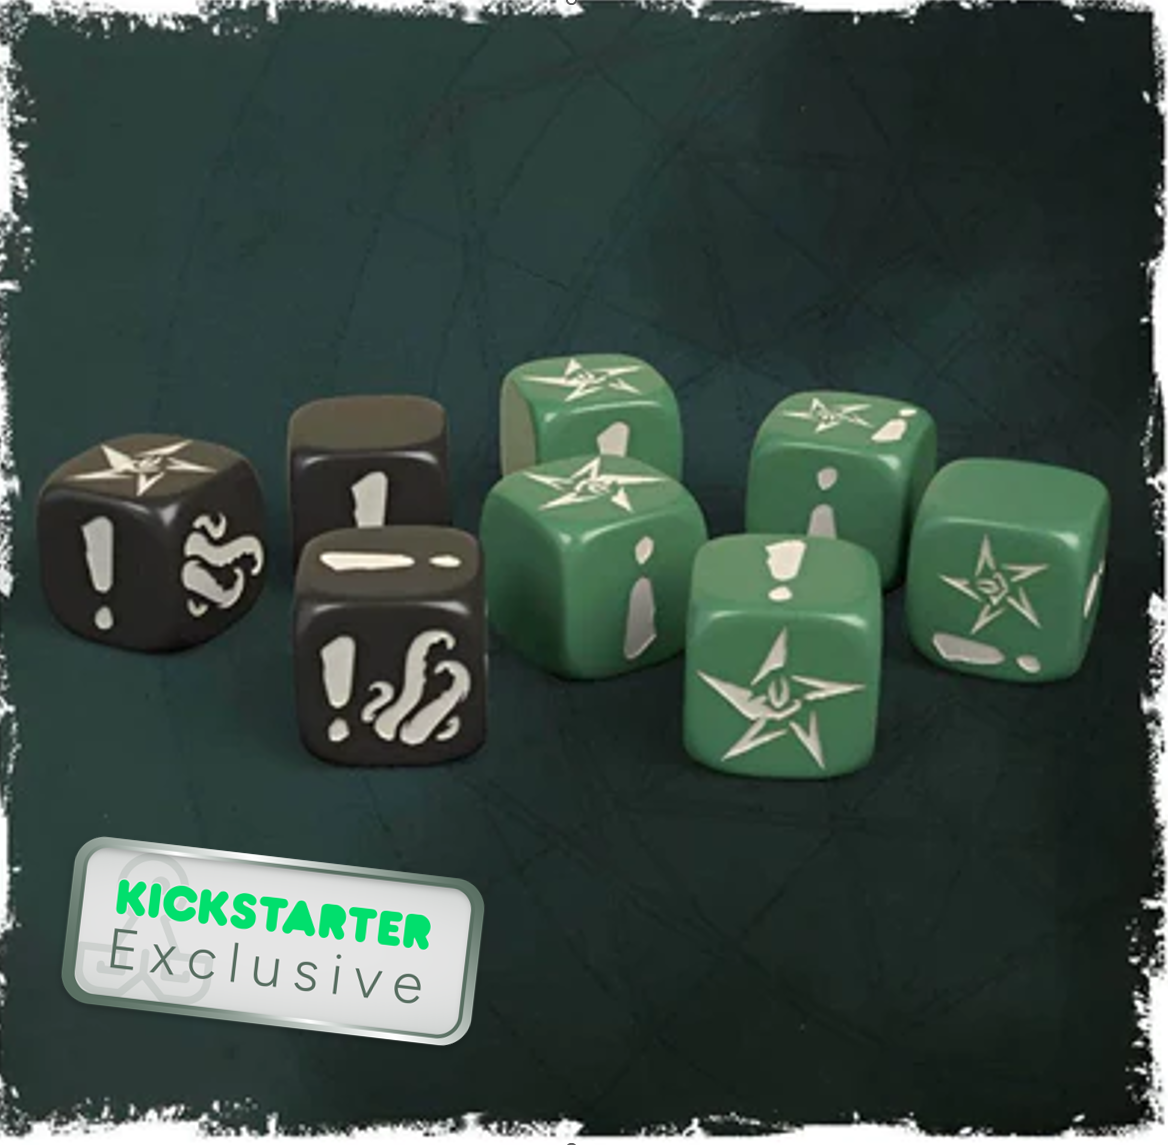 Cthulhu: Death May Die Fear of The Unknown Frost Dice